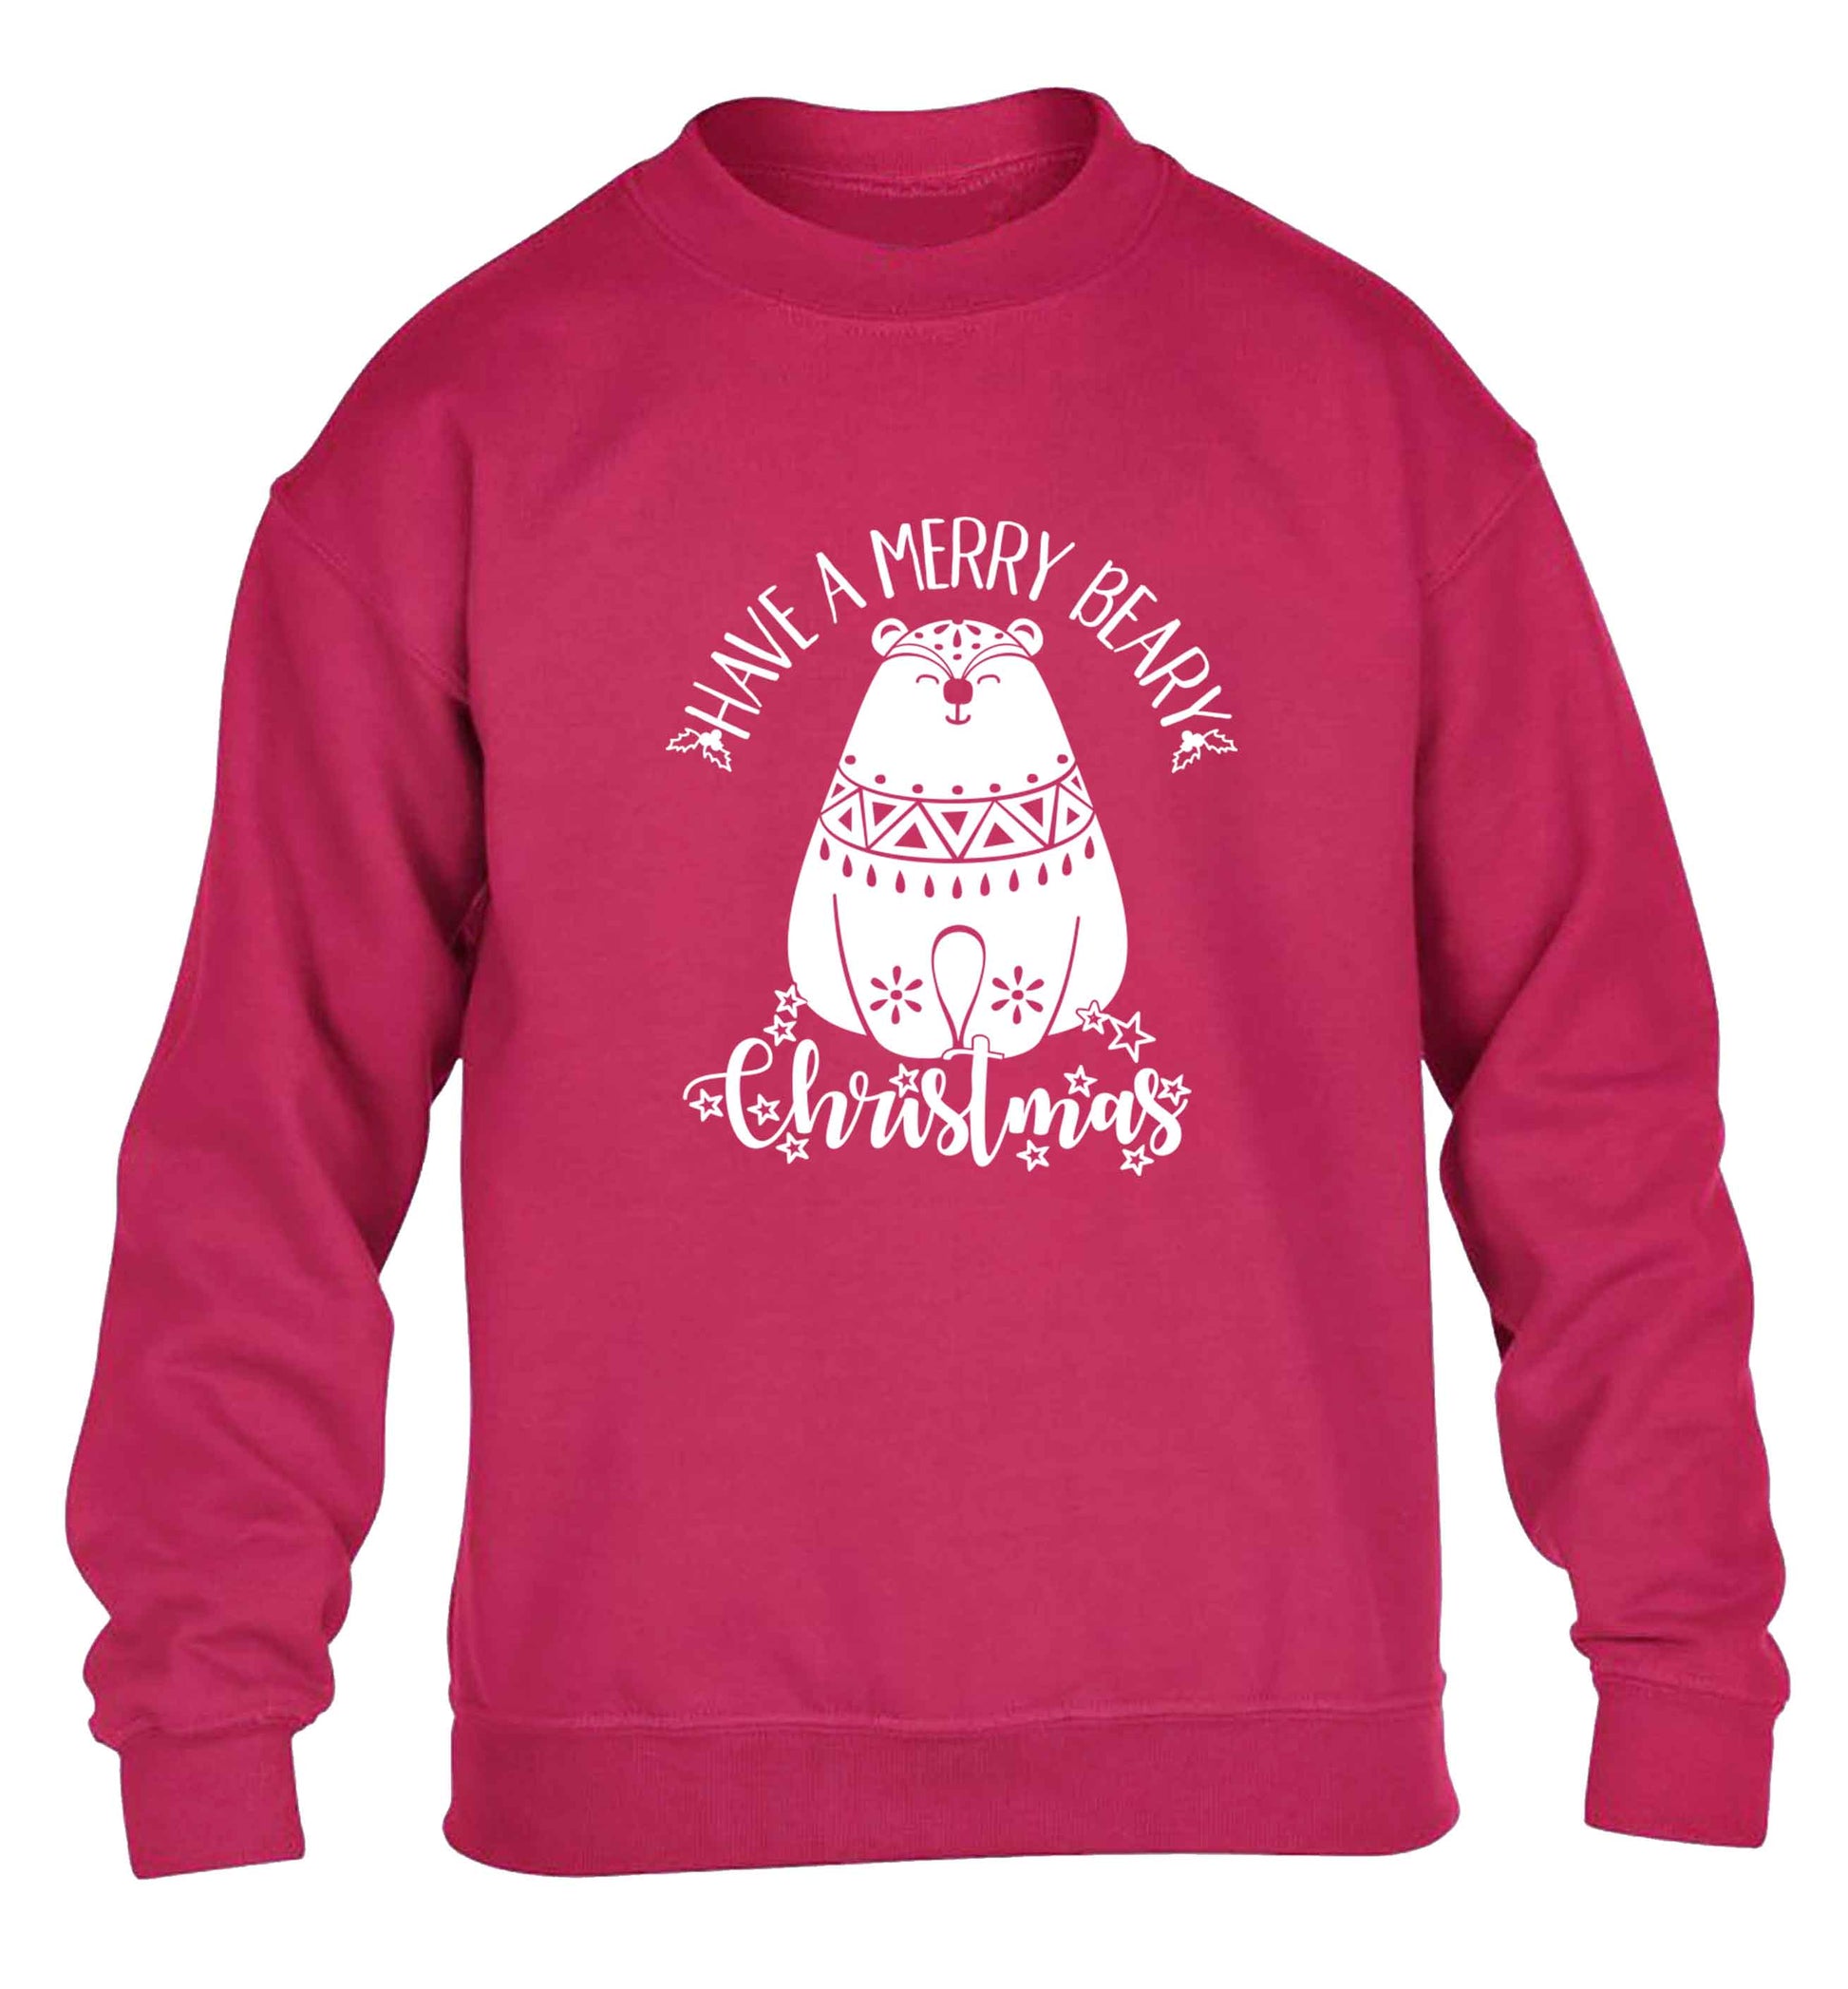 Have a merry beary Christmas children's pink sweater 12-13 Years